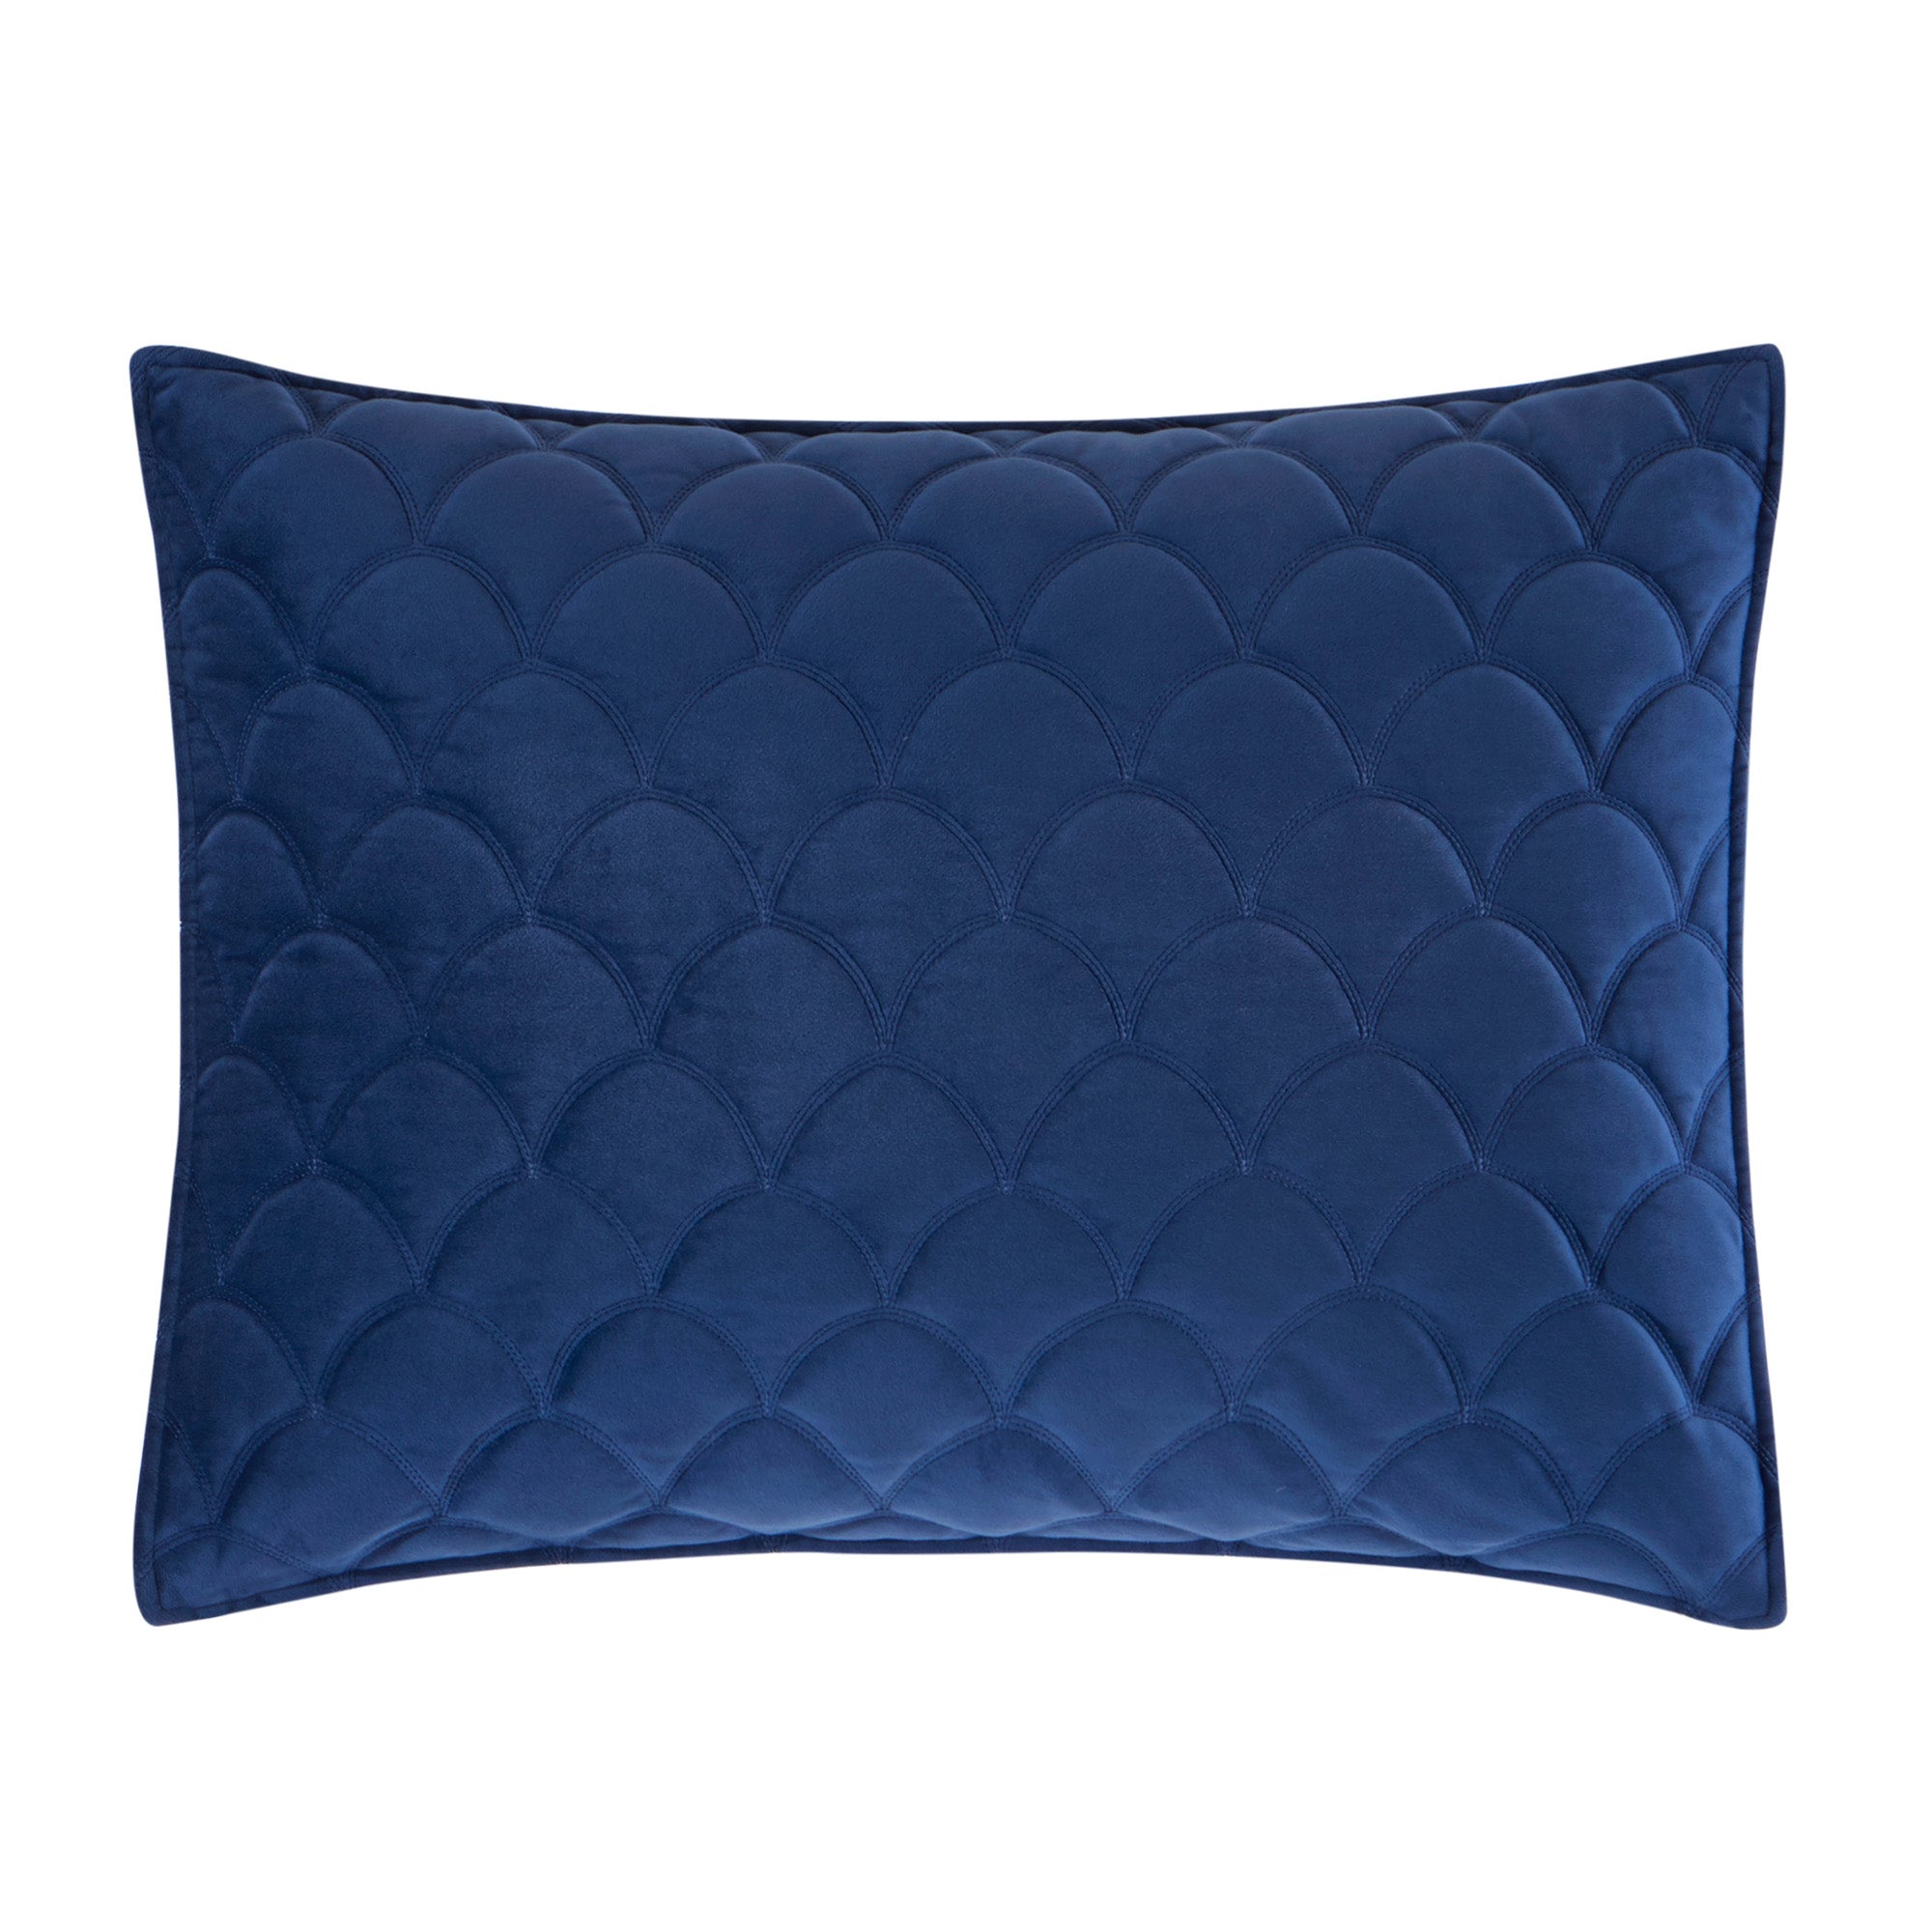 LEVTEX HOME Lorrance Blue Leaves Quilted Cotton Euro Sham (Set of